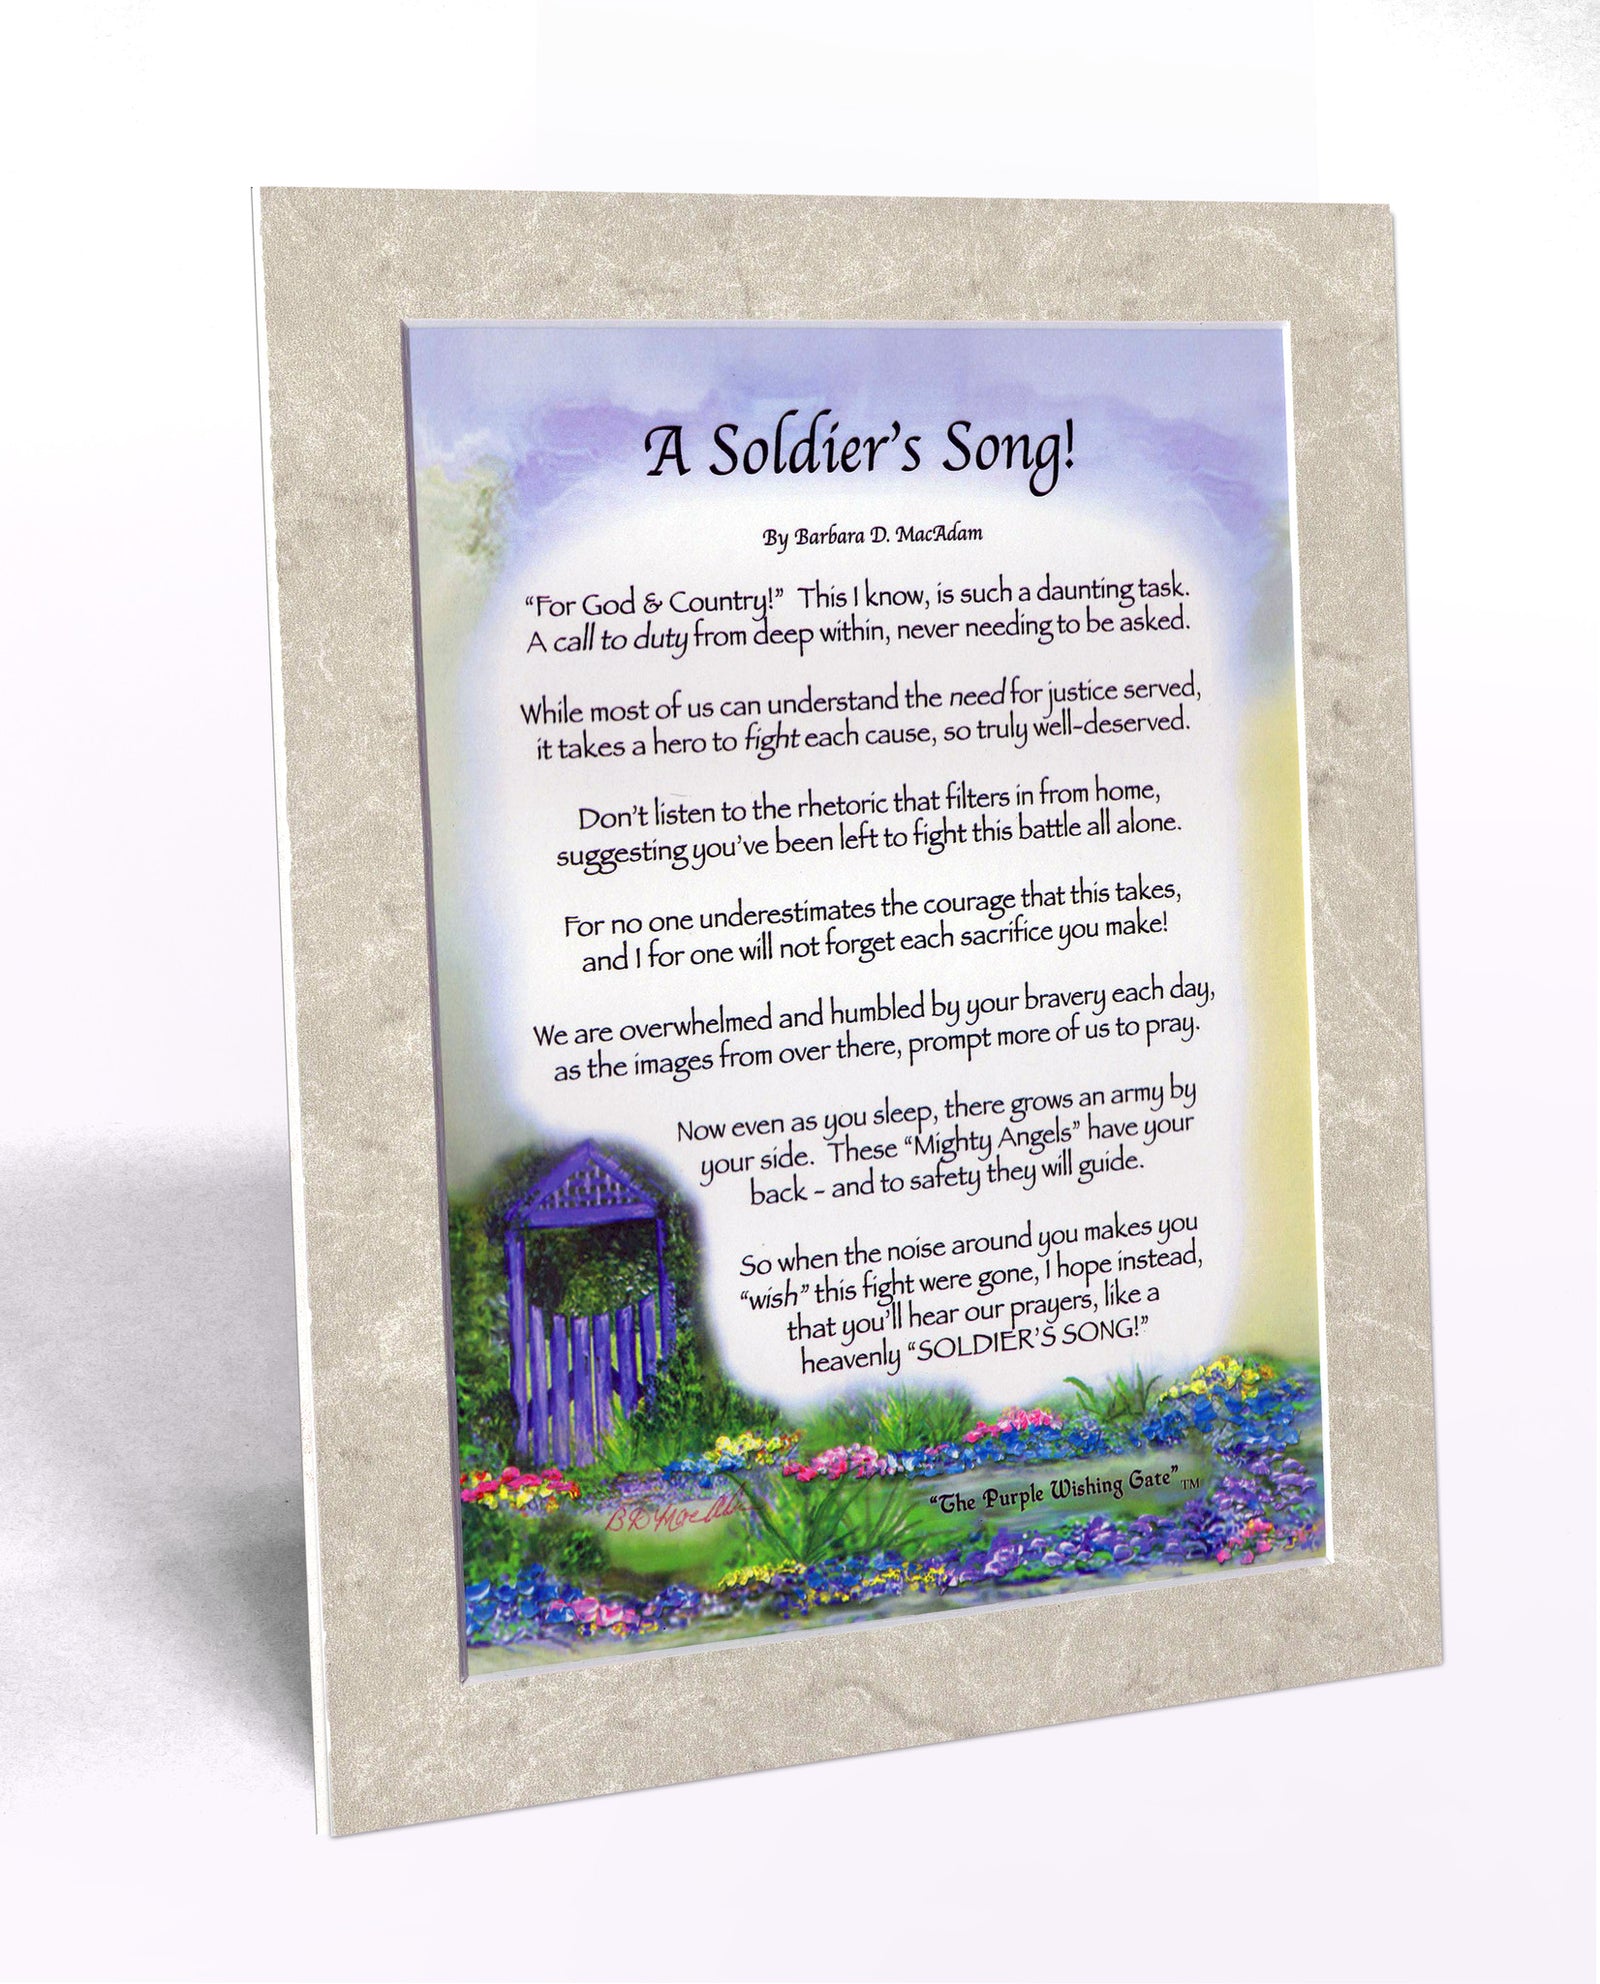 A Soldier's Song (8x10) - 8x10 Custom Matted Clearance - PurpleWishingGate.com